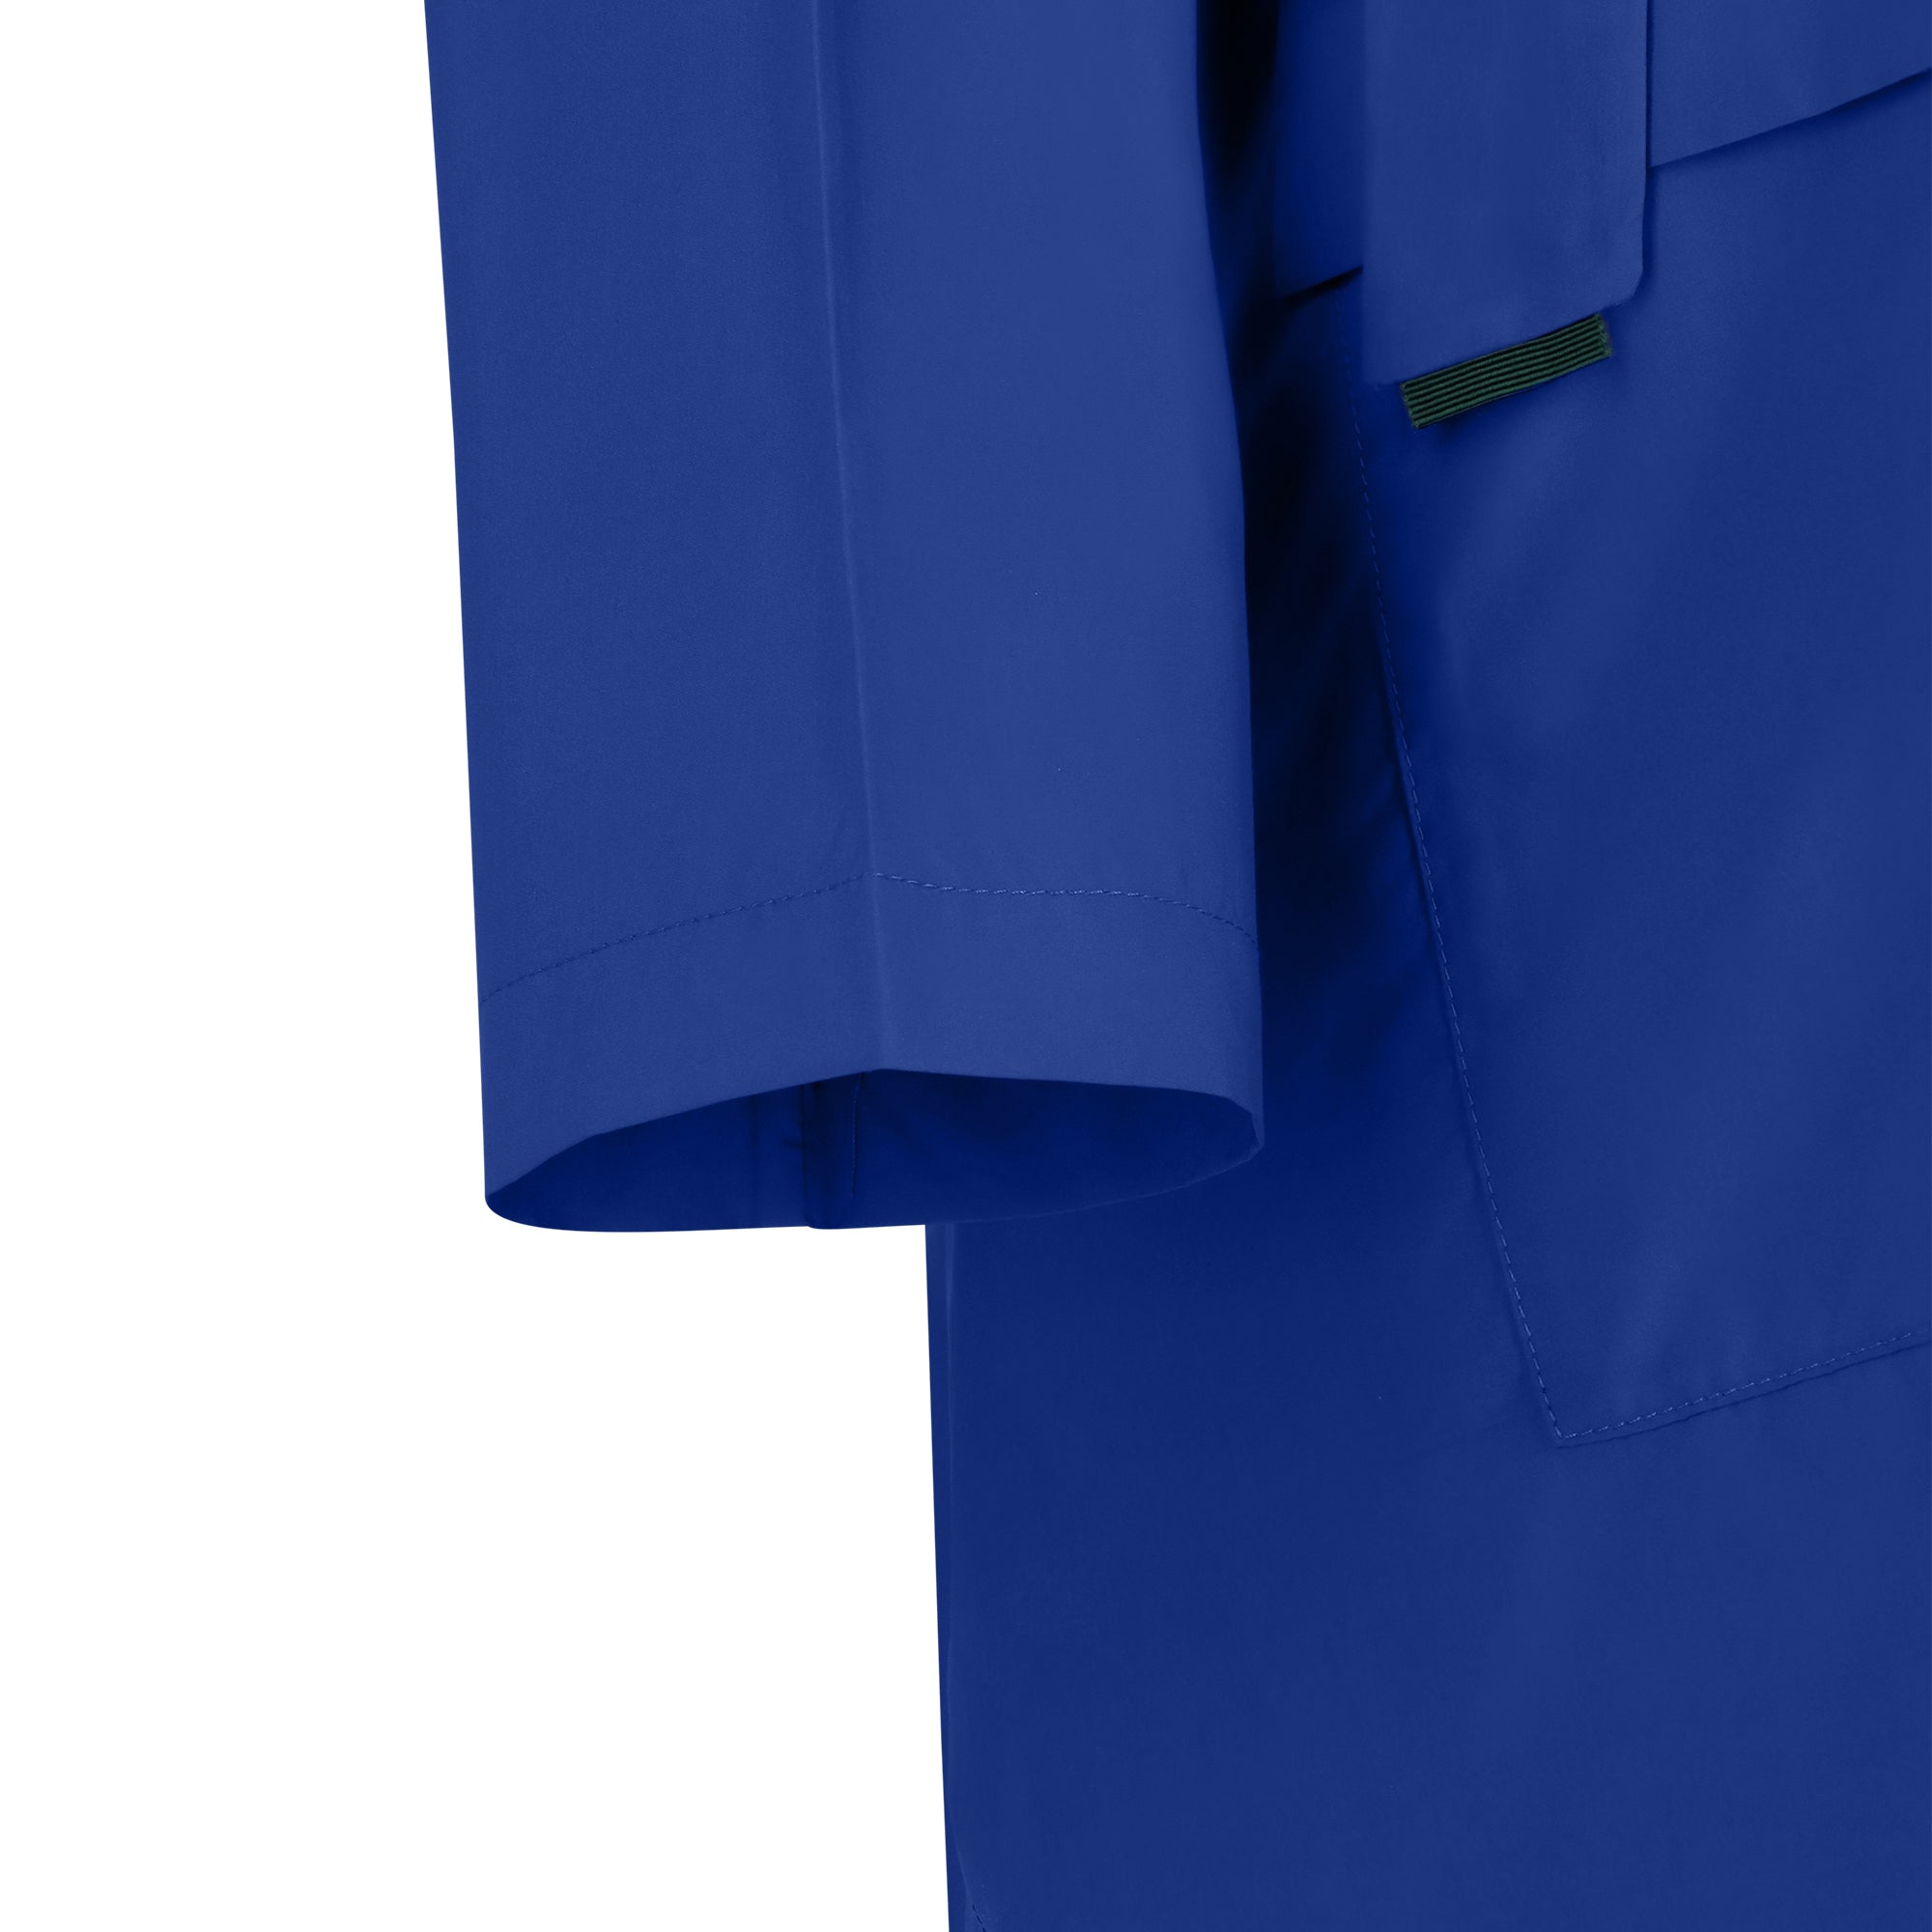 The Classic - royal blue color - sleeve detail